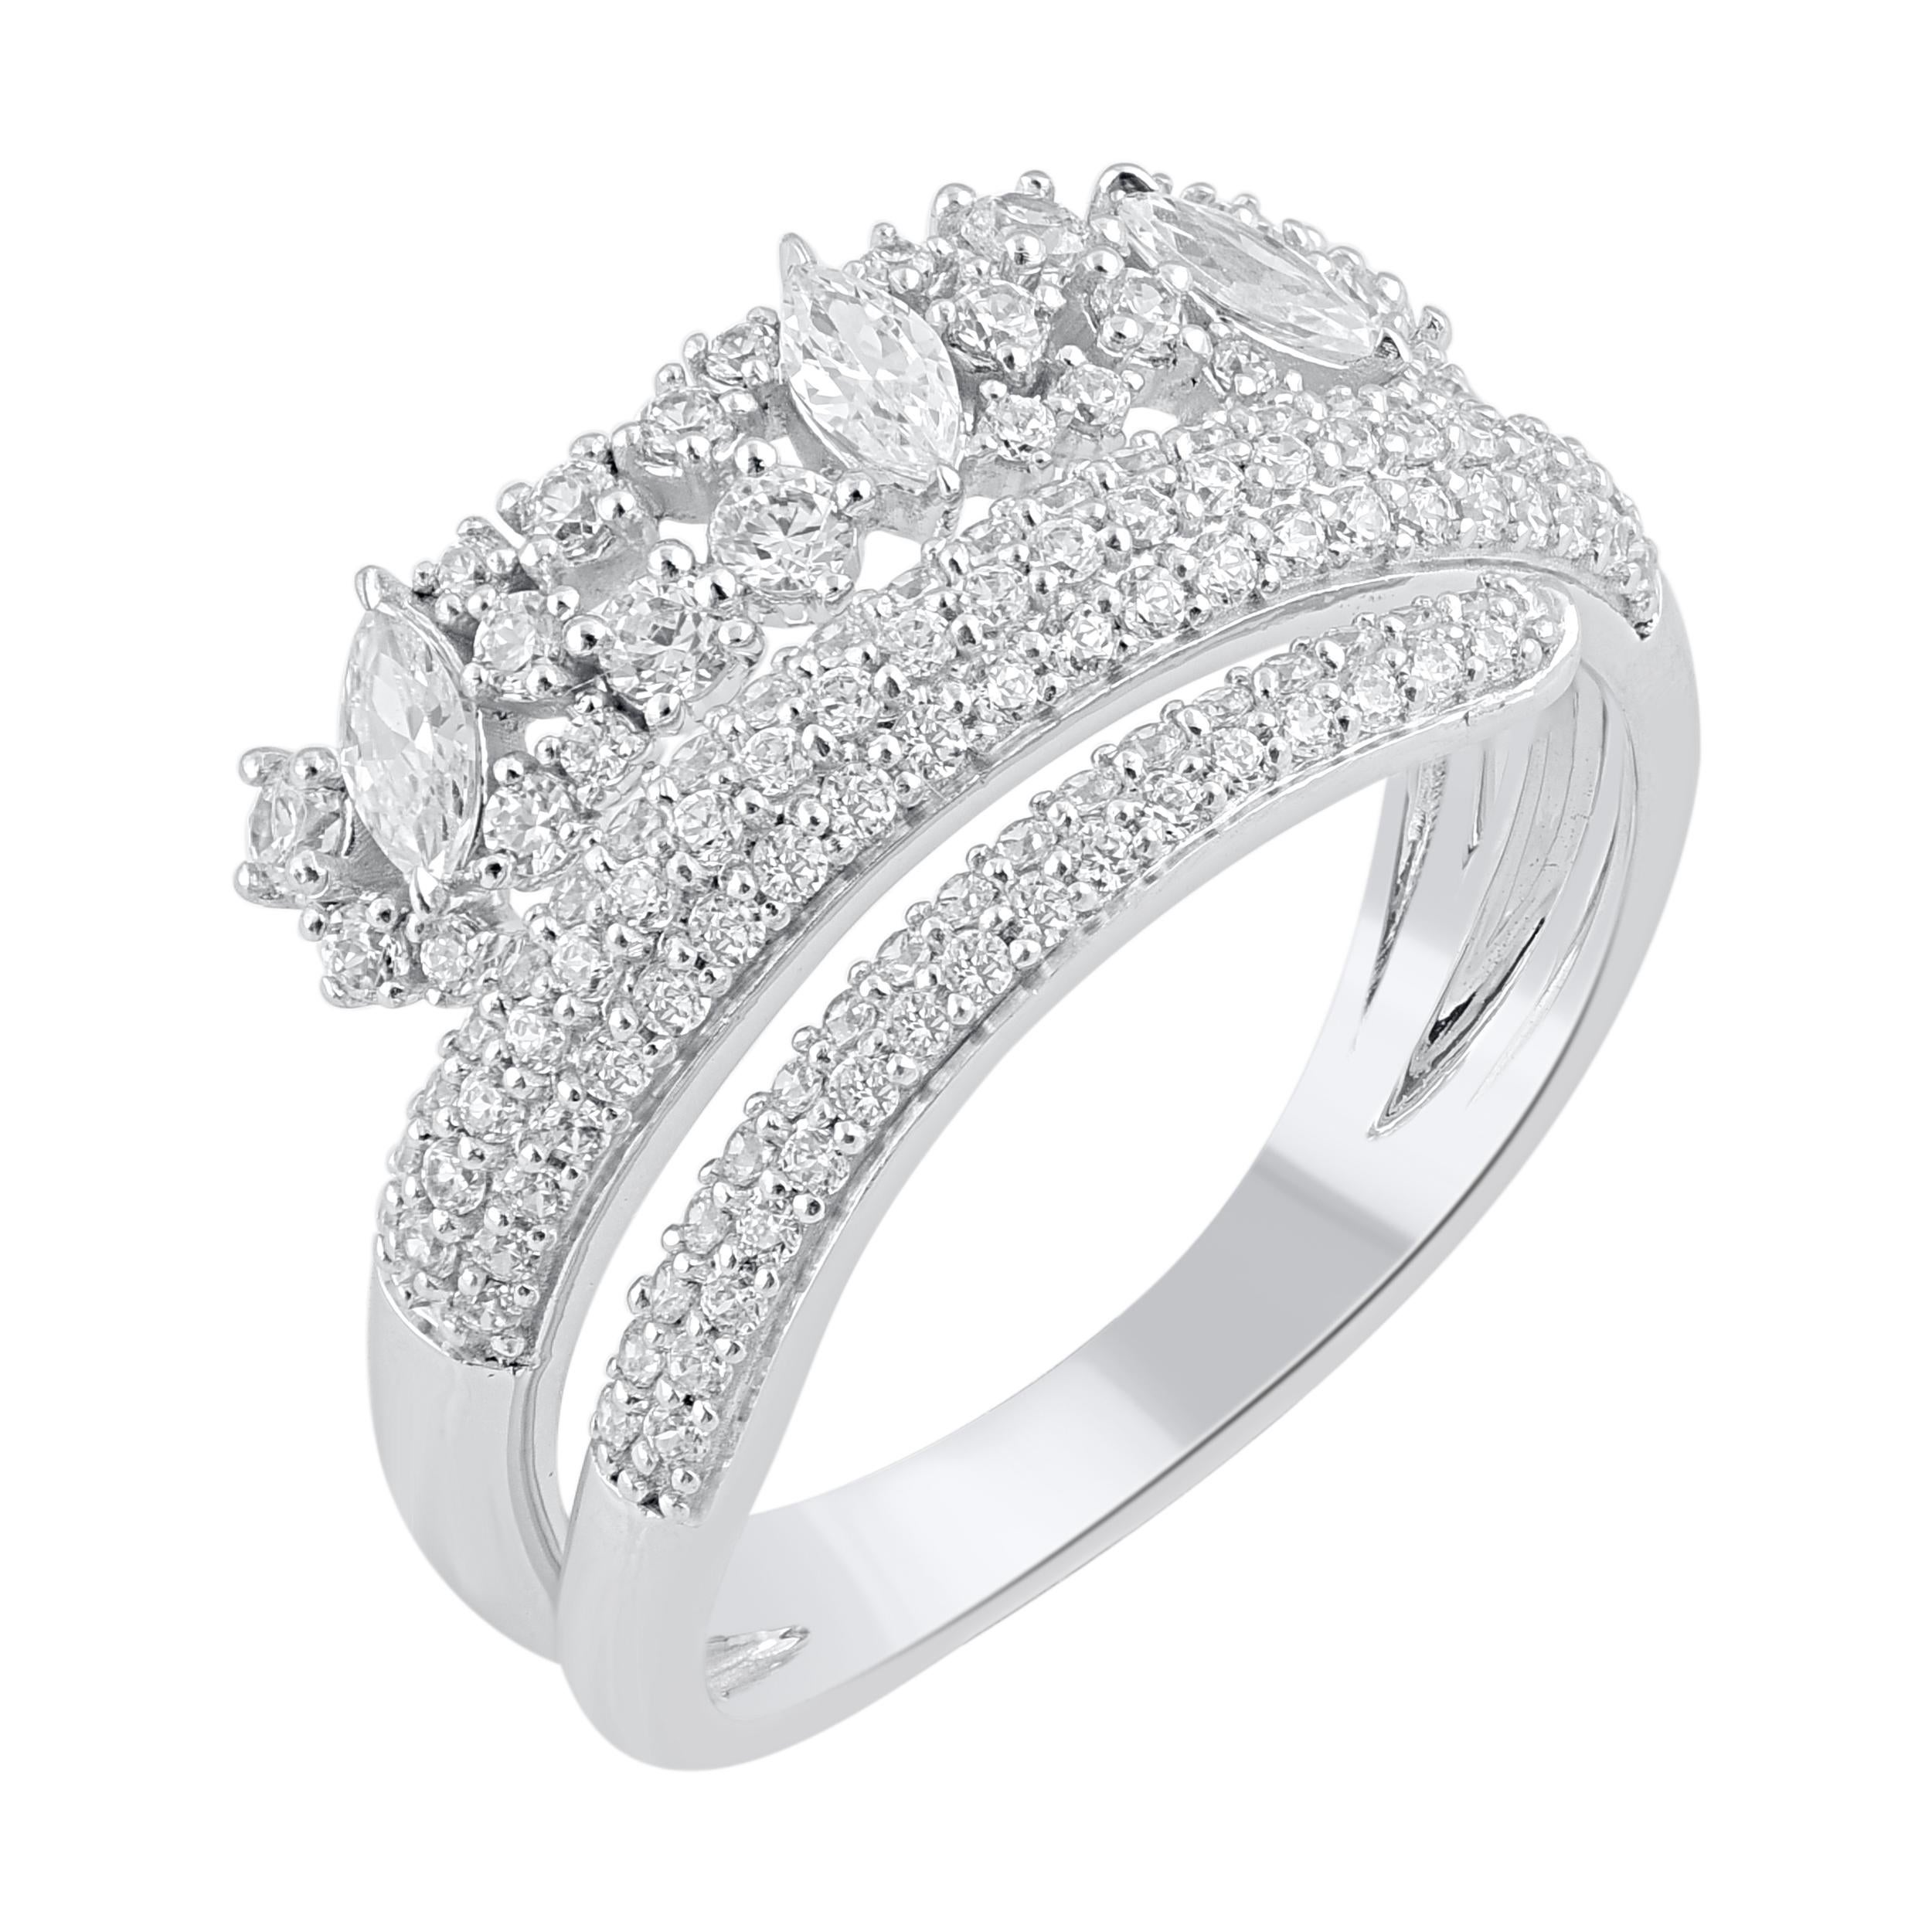 A meaningful symbol of your never ending commitment. The beautiful ring is crafted from 14-karat white gold and features 126 single cut, brilliant cut & marquise diamond set in prong, pave & marquise claw. The white diamonds are graded as H-I color